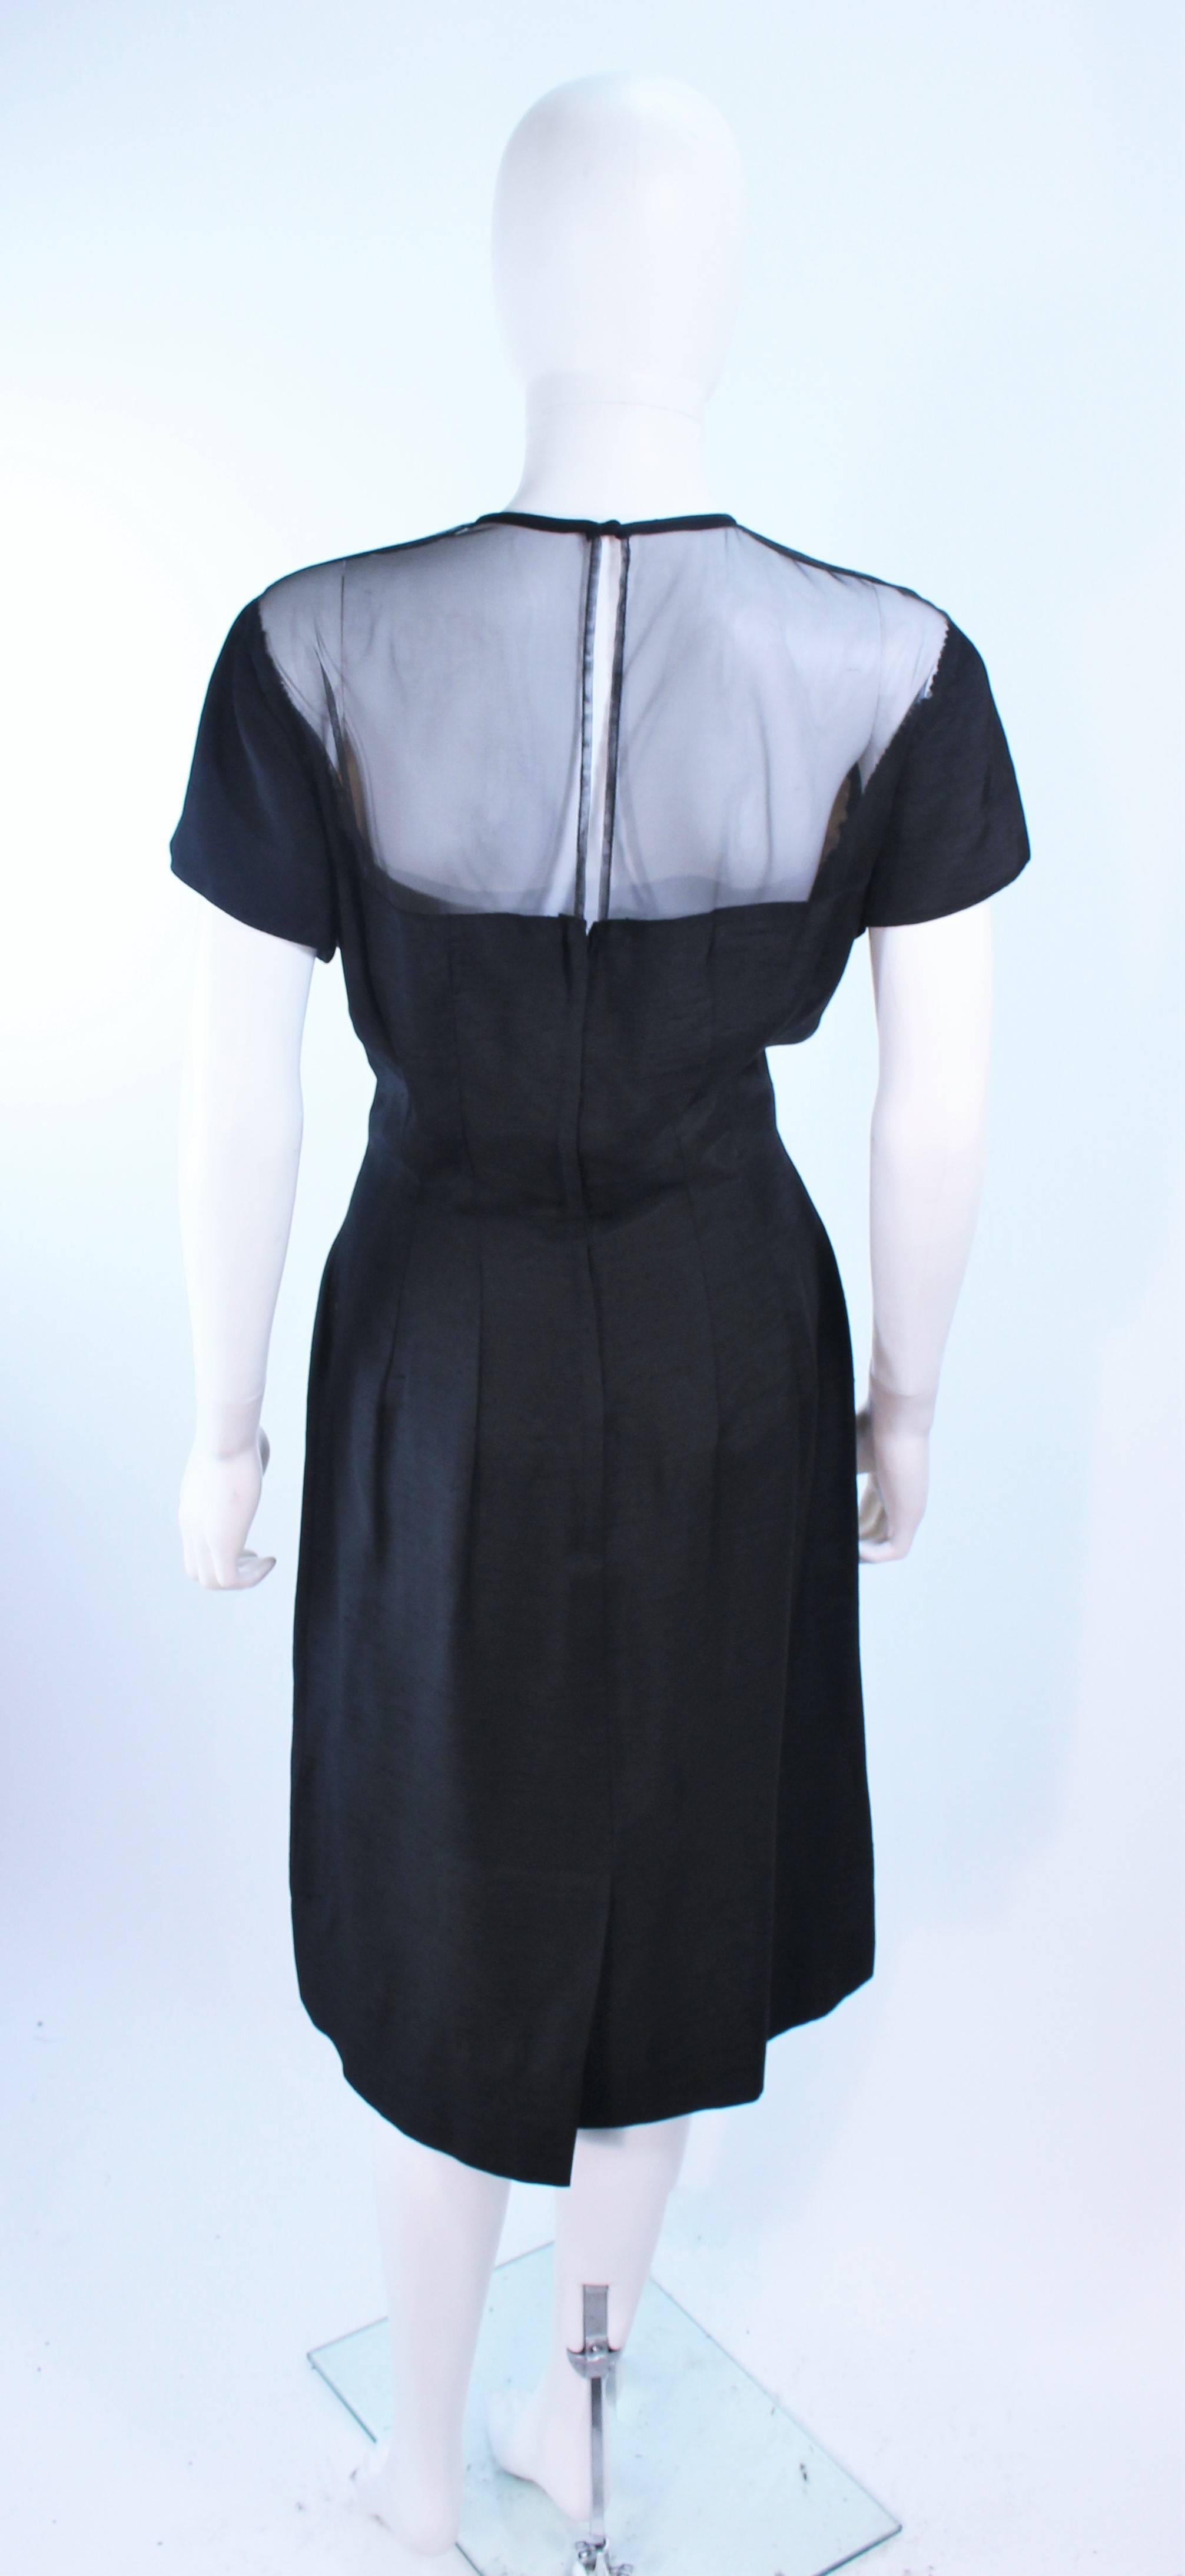 J. HARLAN Black Silk and Lace Cocktail Dress with Sheer Details Size 8 For Sale 5